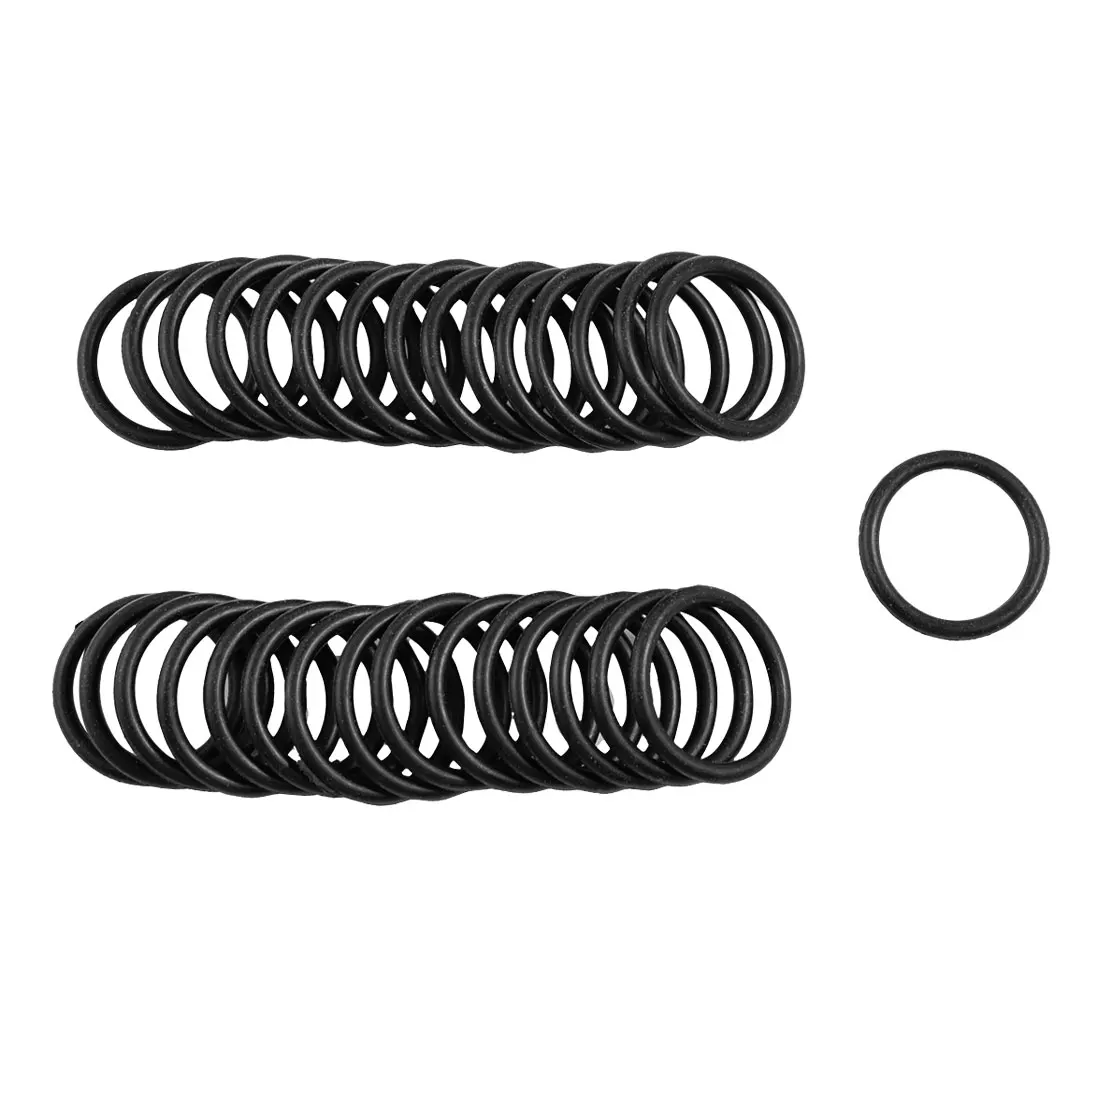 Black uxcell Rubber Oil Seal O Rings Gaskets Washers 10 Piece 29mm x 2.5mm